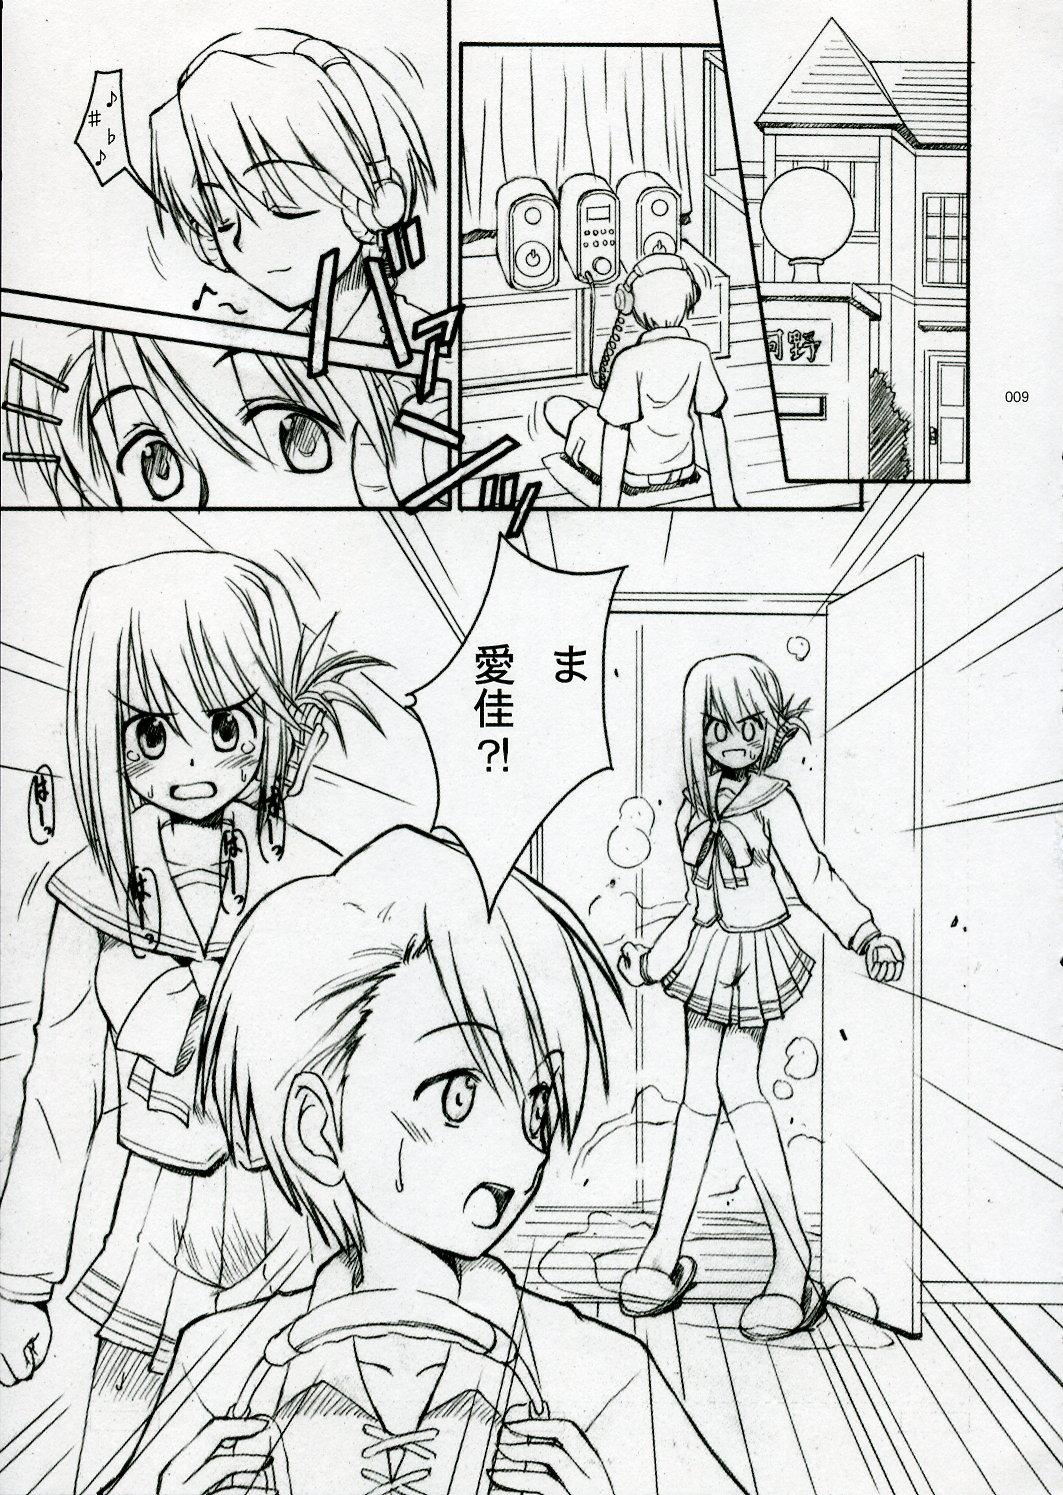 Internal Touch and go - Toheart2 Cums - Page 8